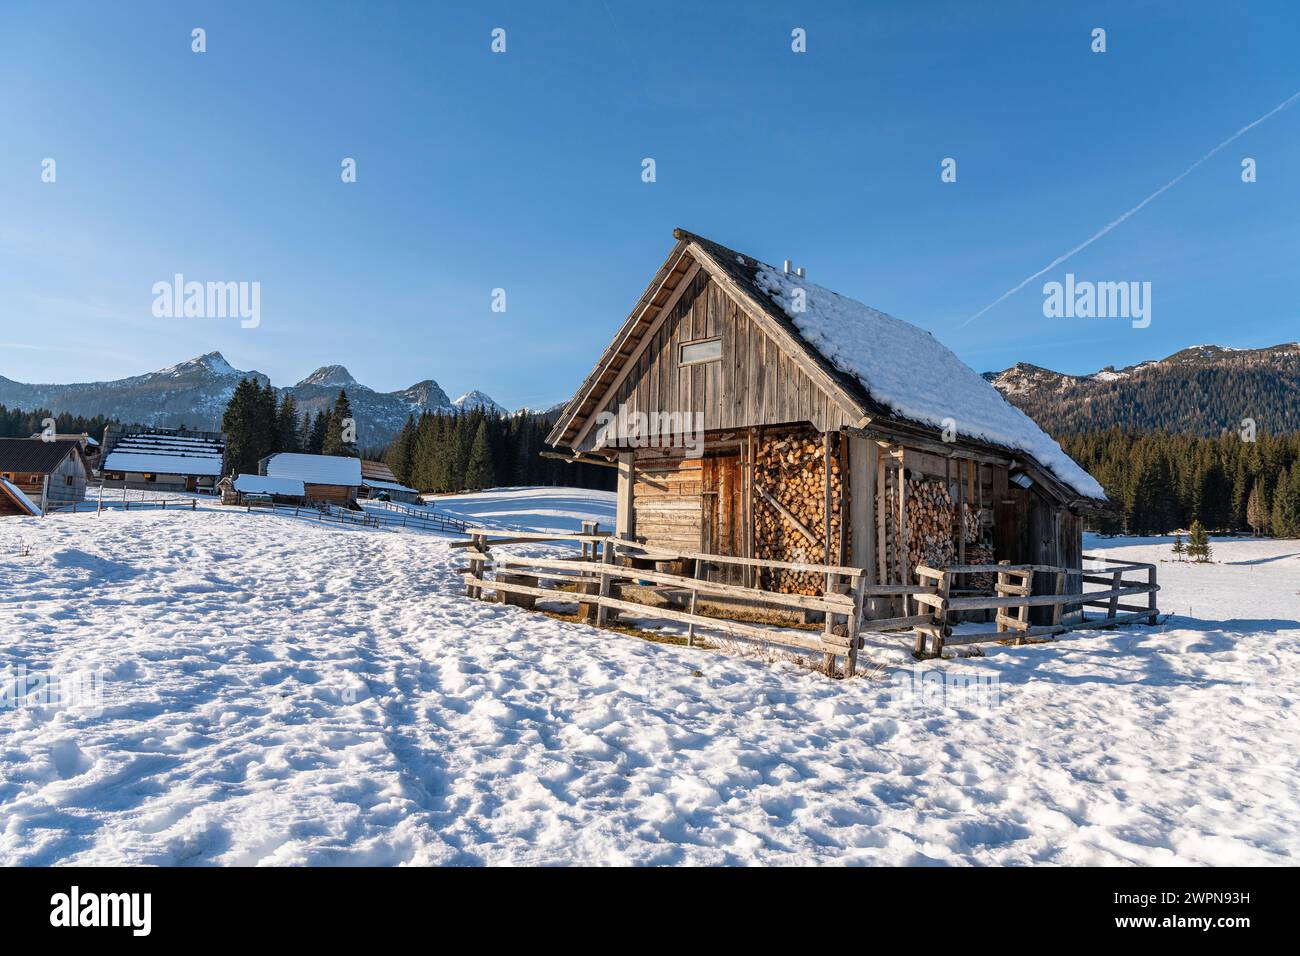 Pokljuka is an alpine plateau in north-western Slovenia. It is located in the Triglav National Park in the Julian Alps at around 1300 m above sea level. Stock Photo